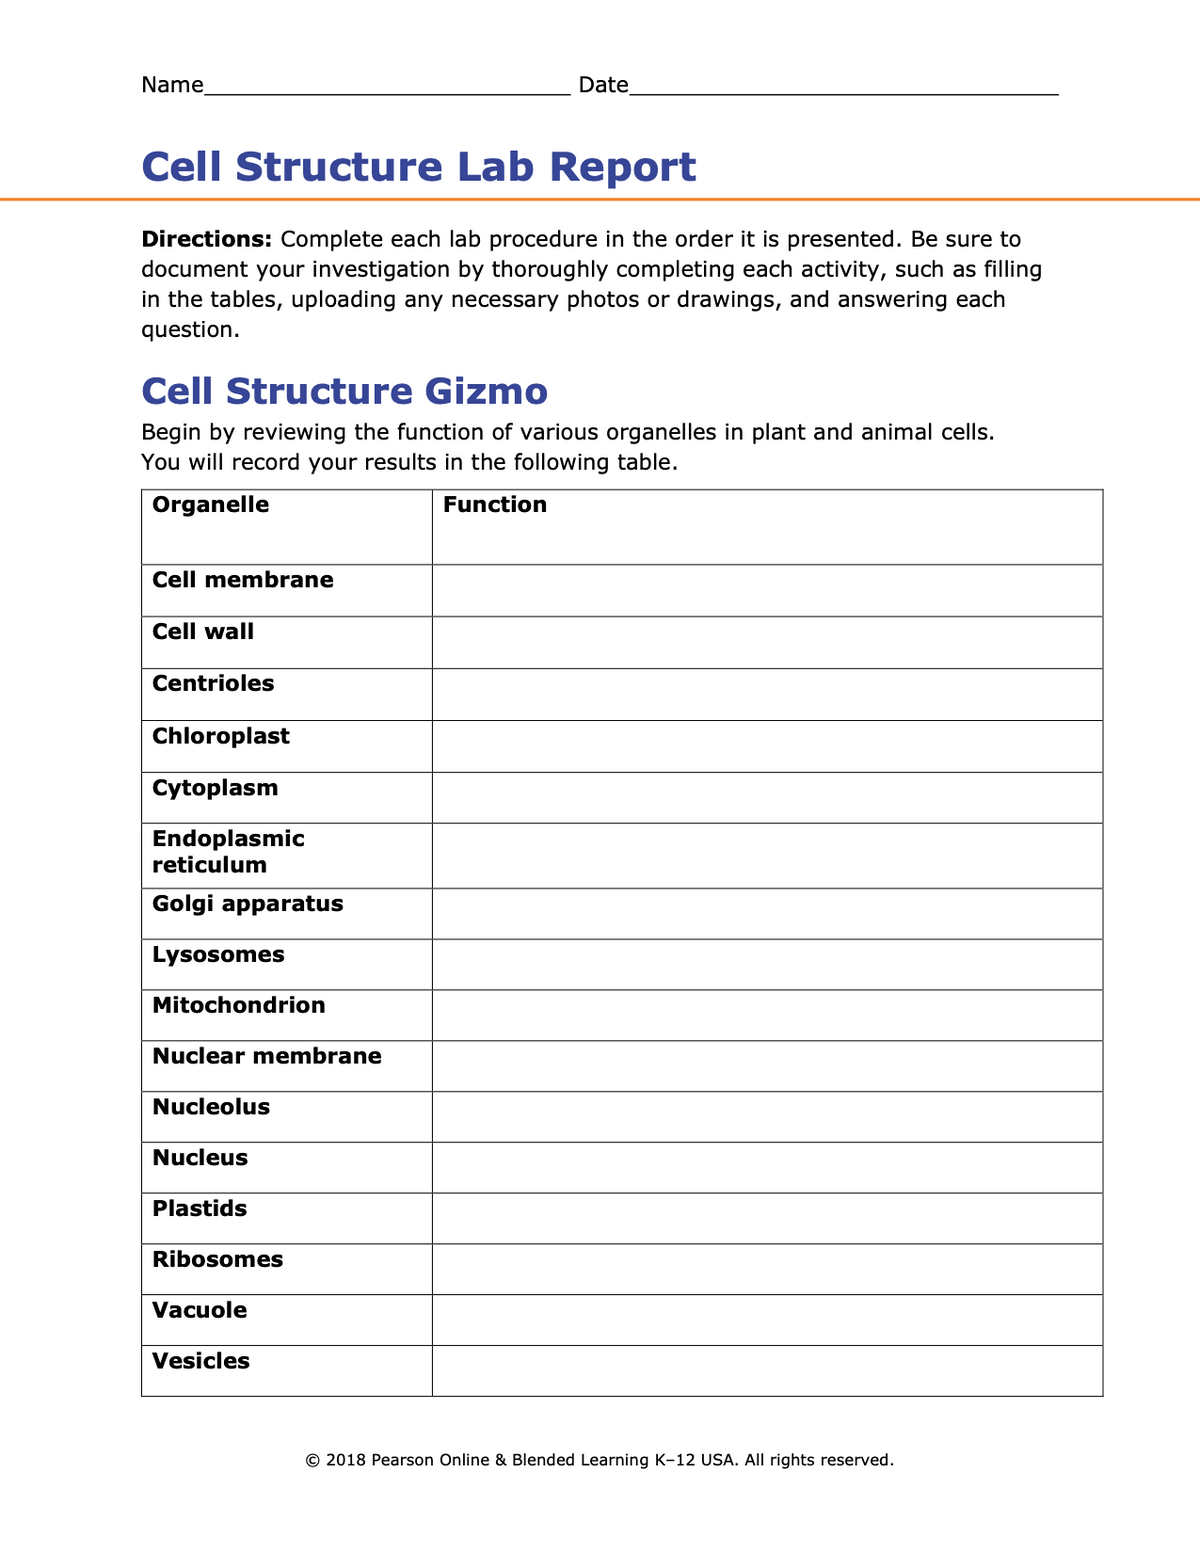 Name
Date
Cell Structure Lab Report
Directions: Complete each lab procedure in the order it is presented. Be sure to
document your investigation by thoroughly completing each activity, such as filling
in the tables, uploading any necessary photos or drawings, and answering each
question.
Cell Structure Gizmo
Begin by reviewing the function of various organelles in plant and animal cells.
You will record your results in the following table.
Organelle
Function
Cell membrane
Cell wall
Centrioles
Chloroplast
Cytoplasm
Endoplasmic
reticulum
Golgi apparatus
Lysosomes
Mitochondrion
Nuclear membrane
Nucleolus
Nucleus
Plastids
Ribosomes
Vacuole
Vesicles
© 2018 Pearson Online & Blended Learning K-12 USA. All rights reserved.
